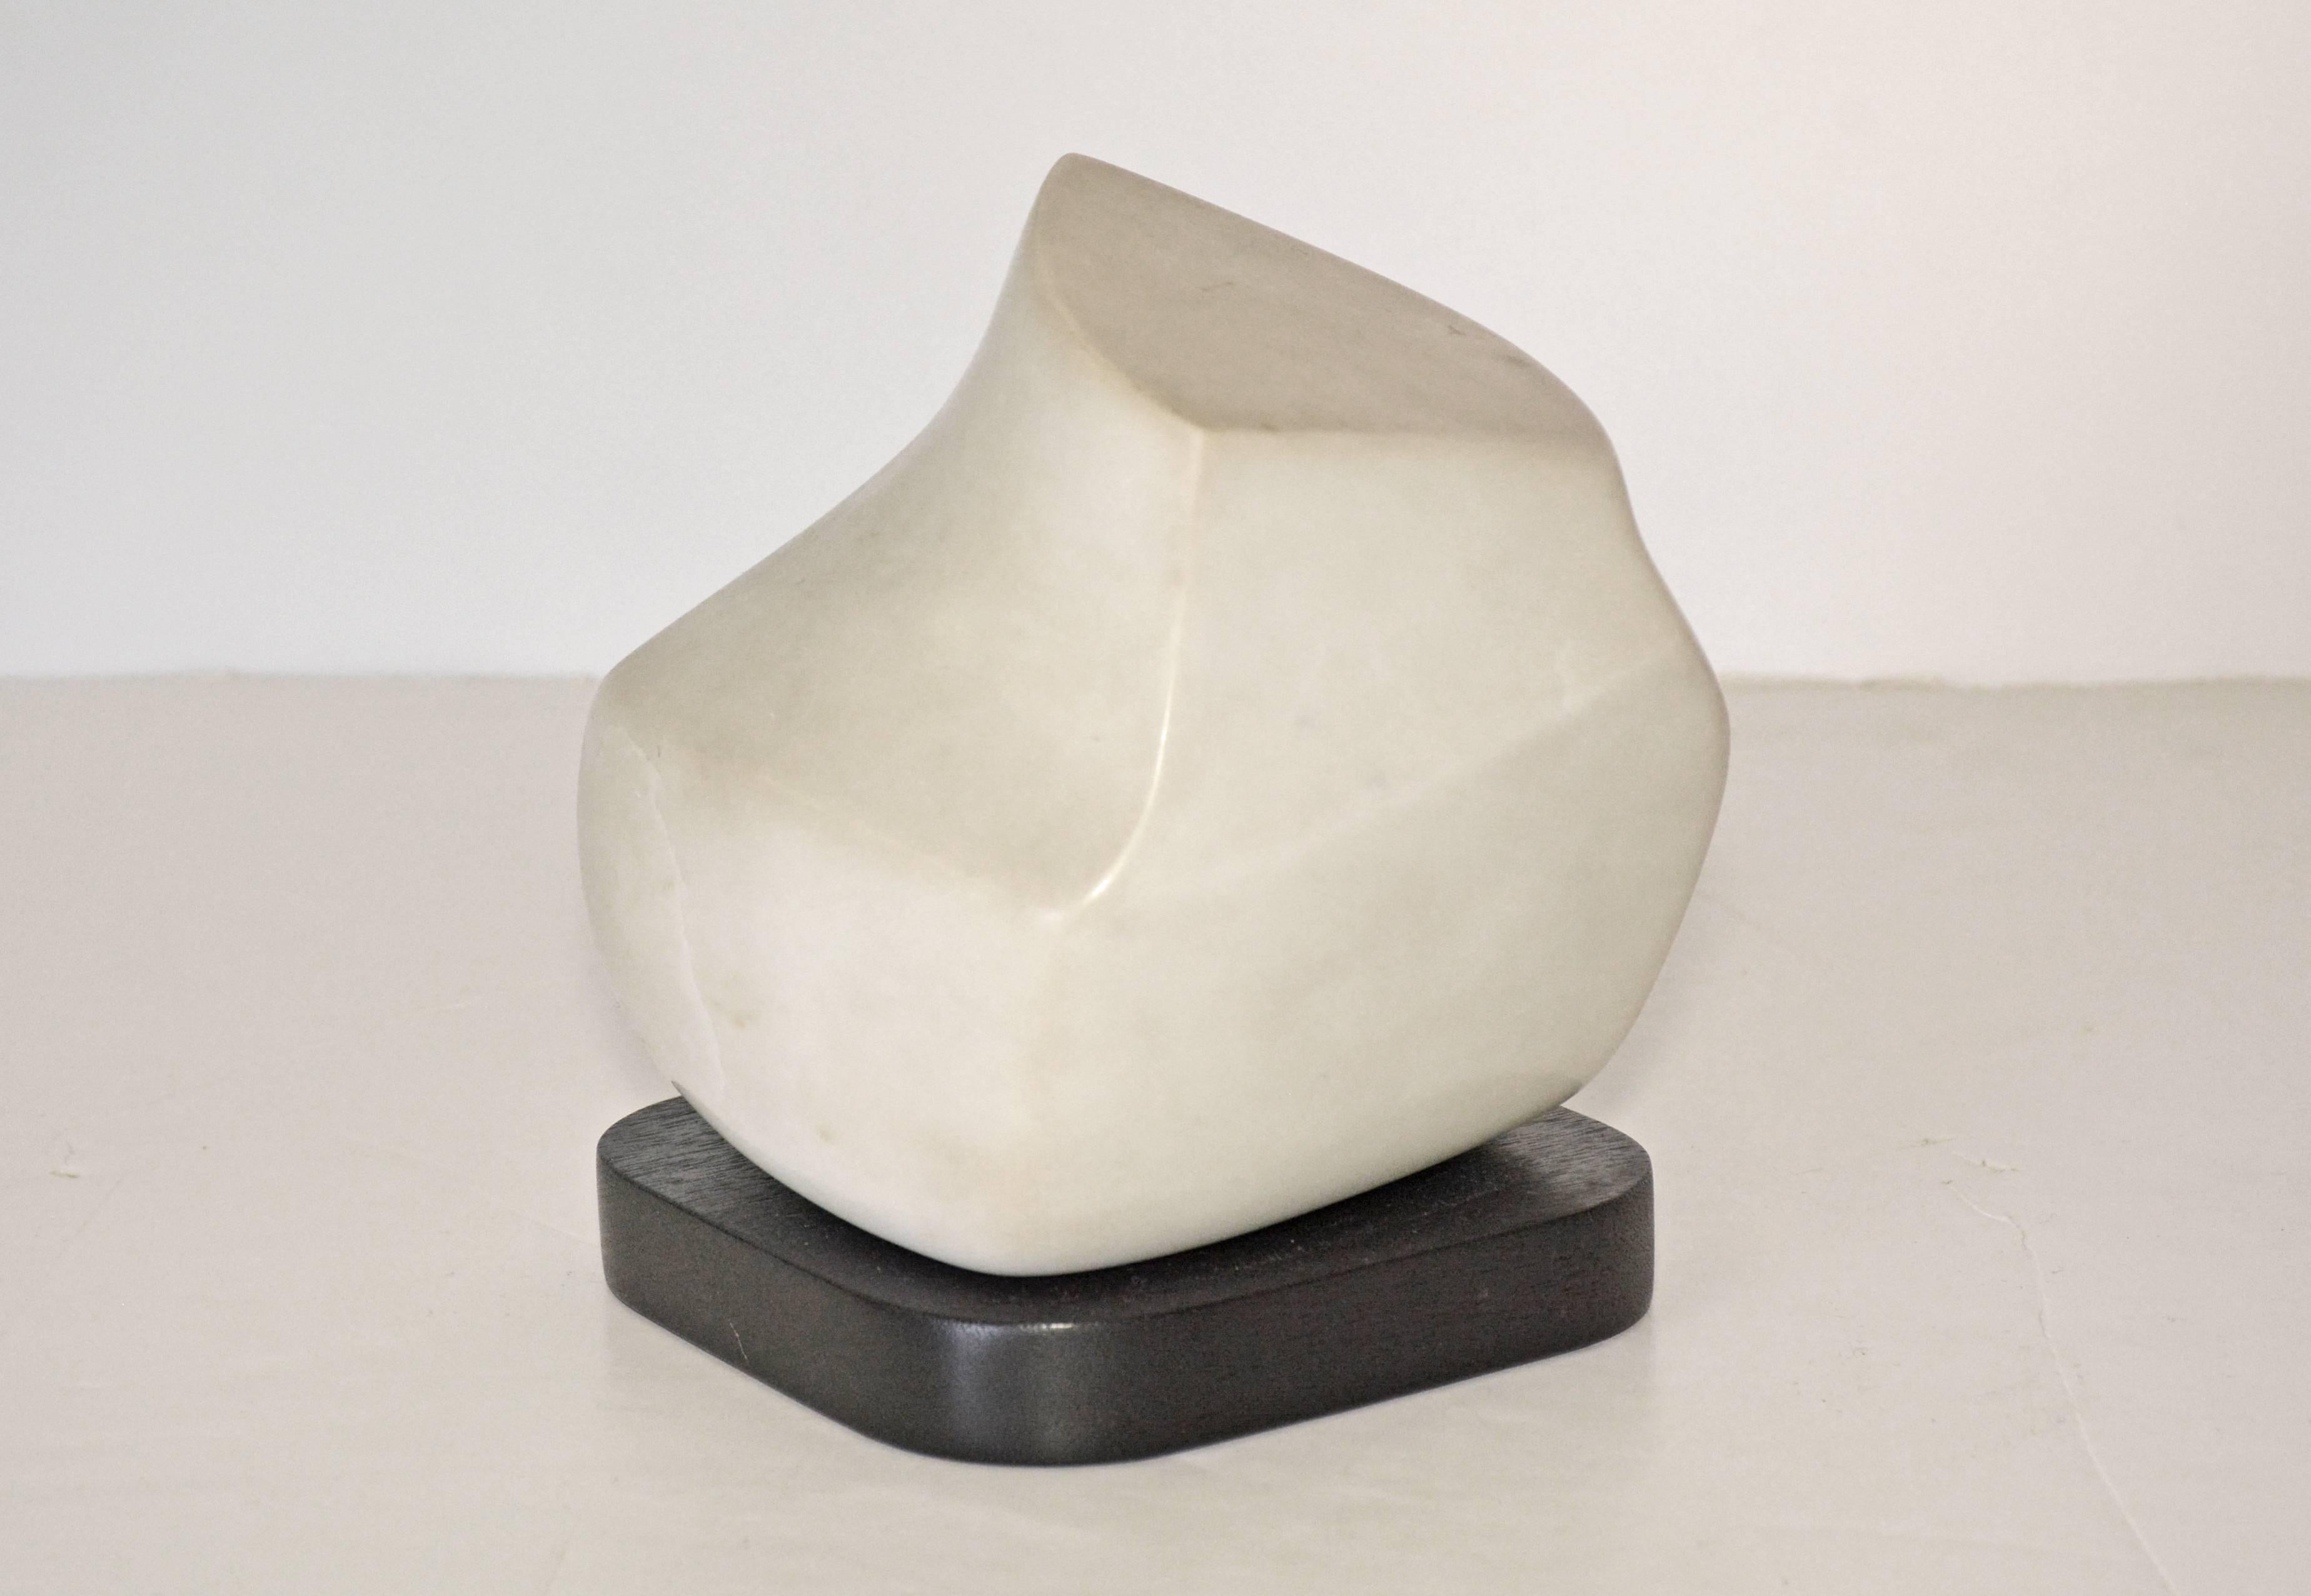 Small contemporary white marble sculpture sits on a black platform. Sculptor is Jean Downey (1931-2009). She was born in Canada, studied art in Illinois, New York and Connecticut. Her work is included in private and corporate collections in the US